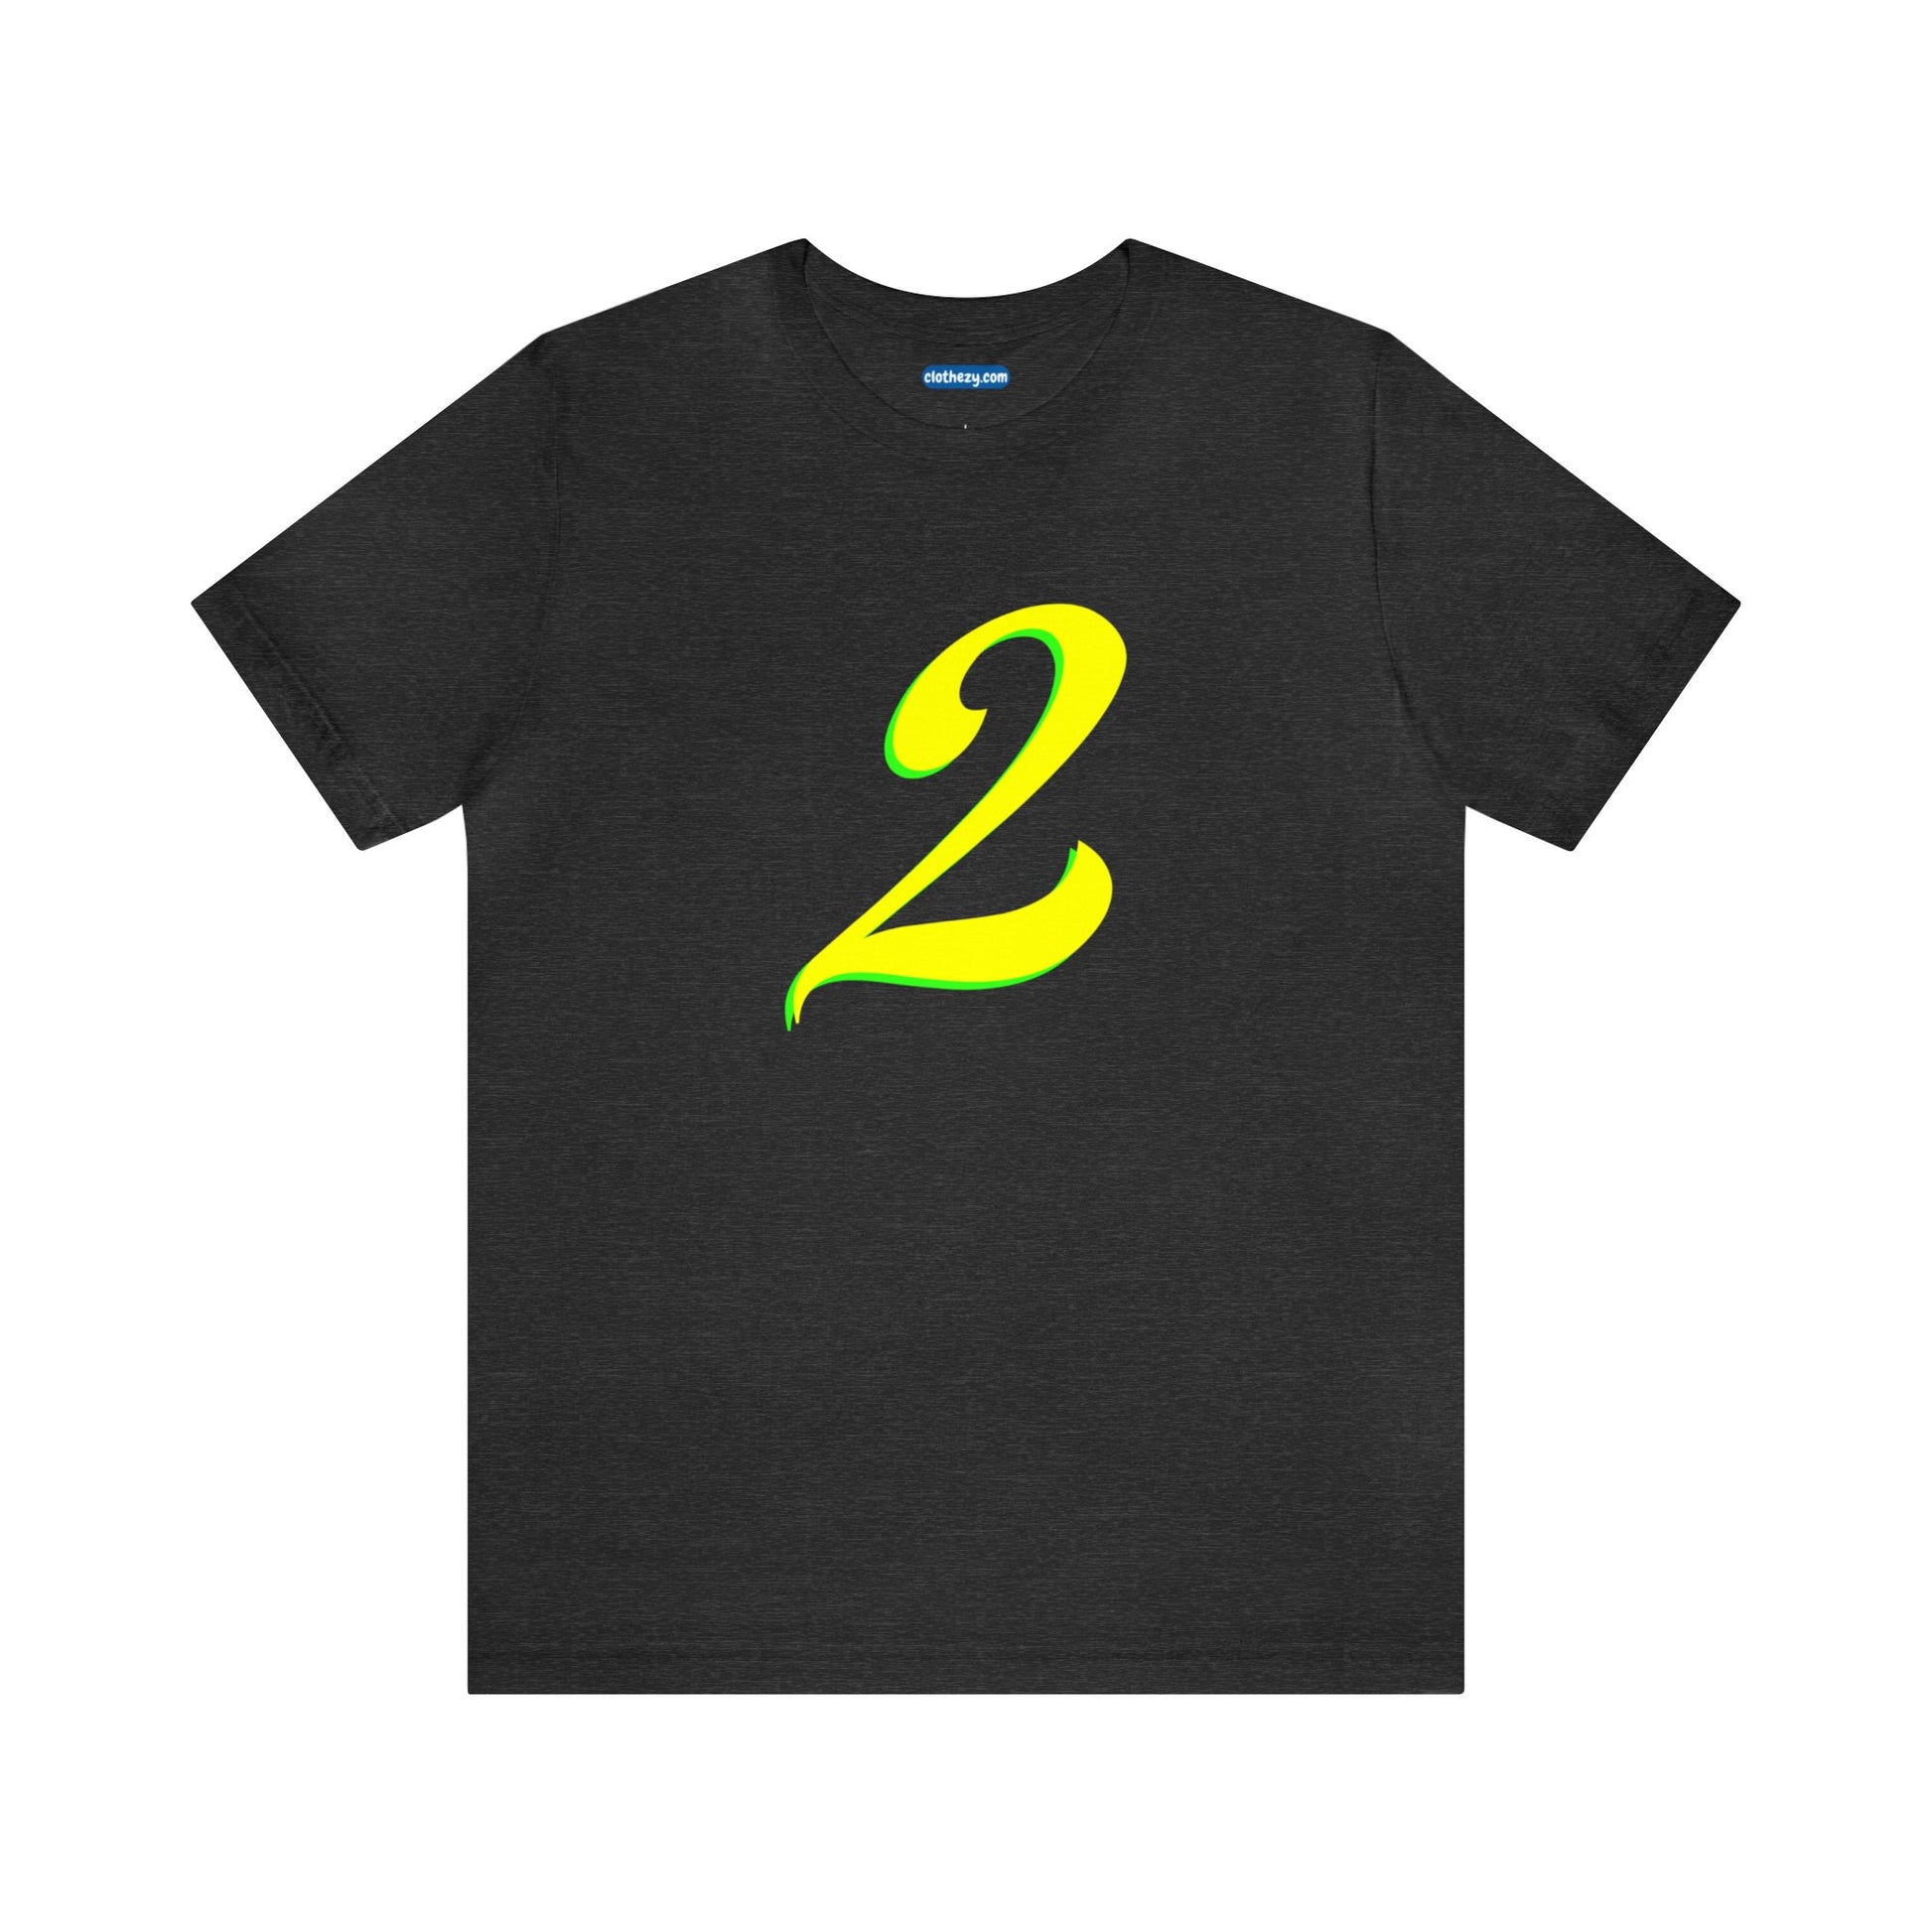 Number 2 Design - Soft Cotton Tee for birthdays and celebrations, Gift for friends and family, Multiple Options by clothezy.com in Gold Size Small - Buy Now